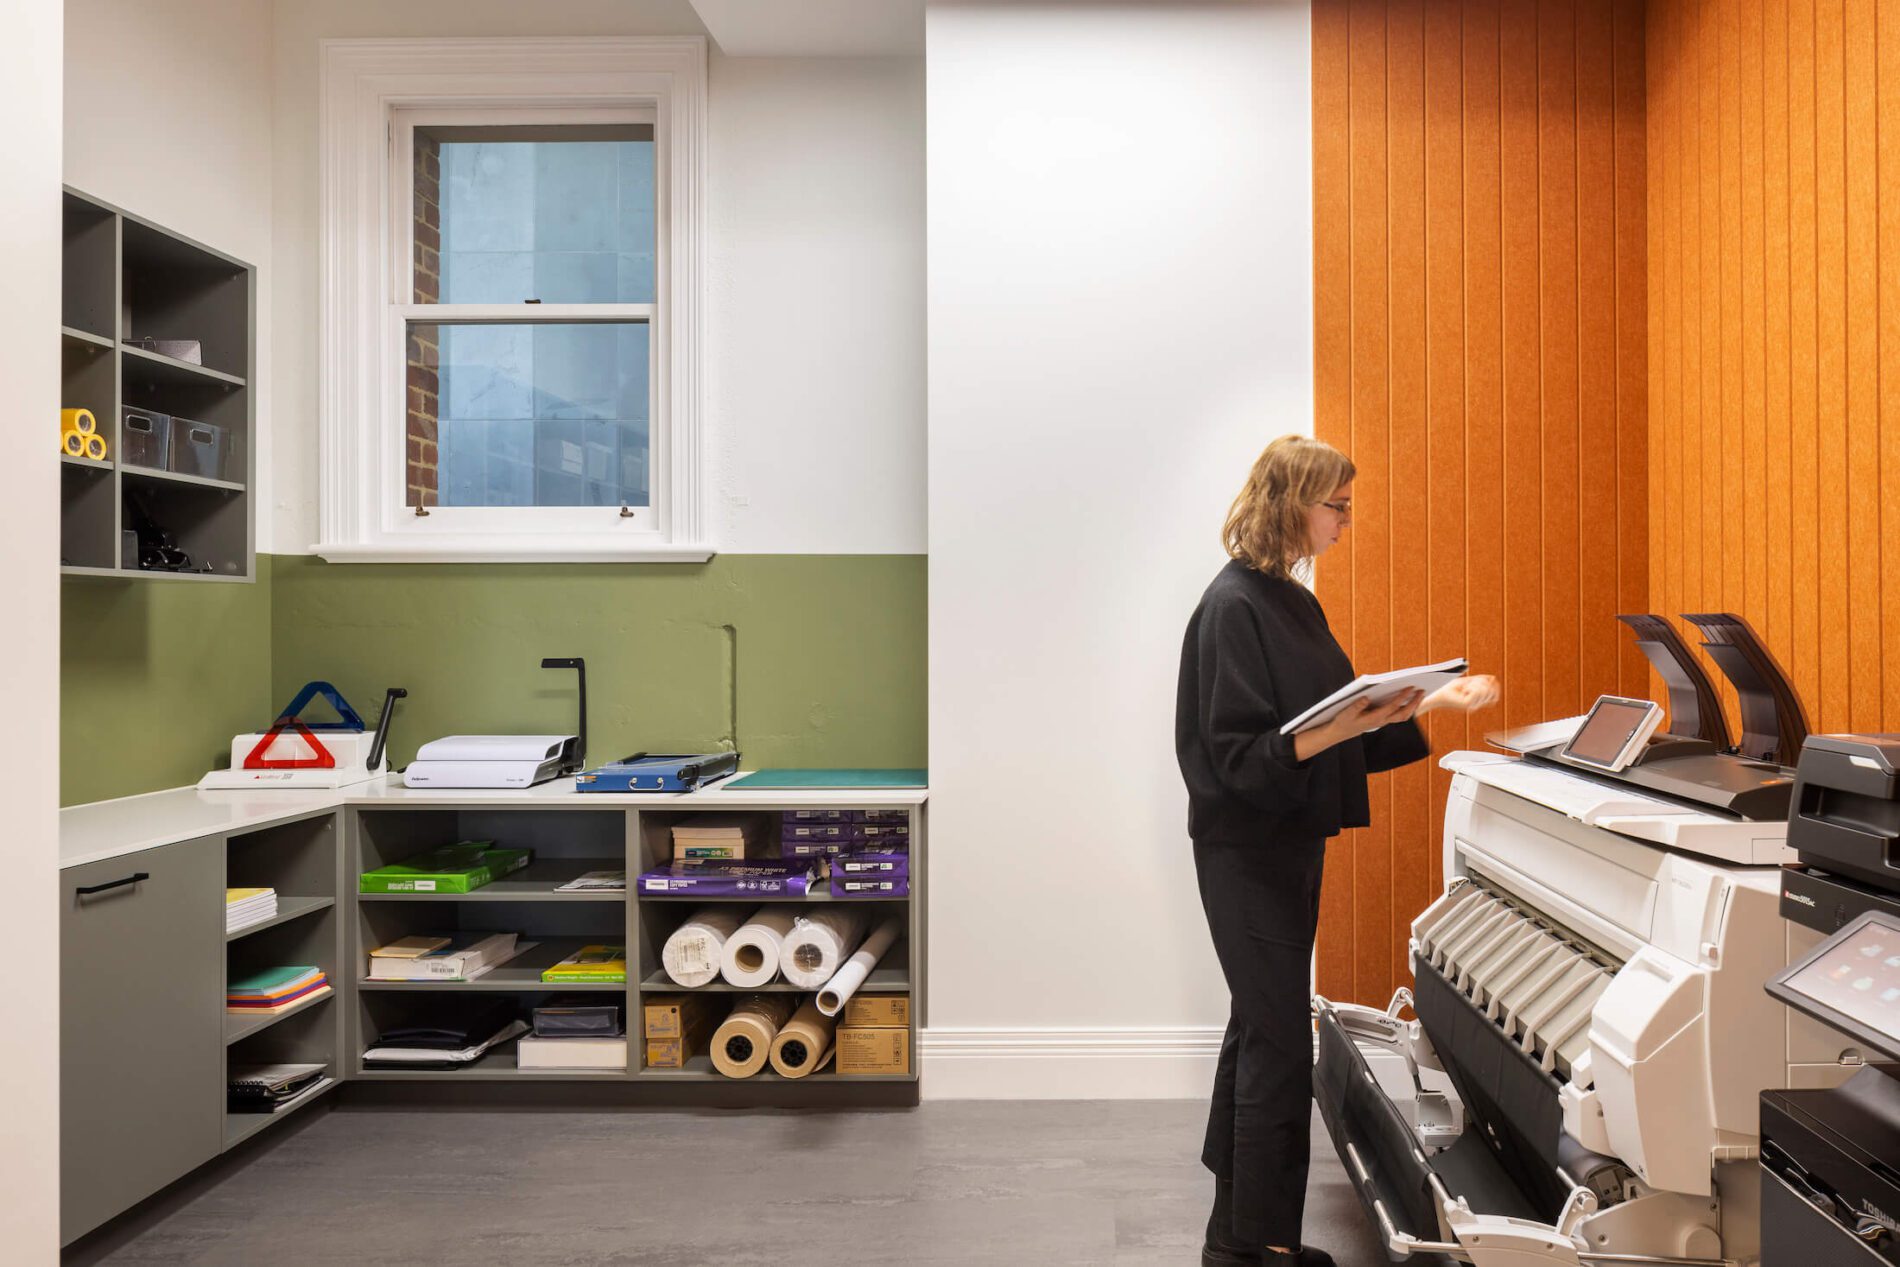 Woman in black stands at printer in office utility room. Paper storage, guillotines in background. Orange vertical panelling and green feature walls